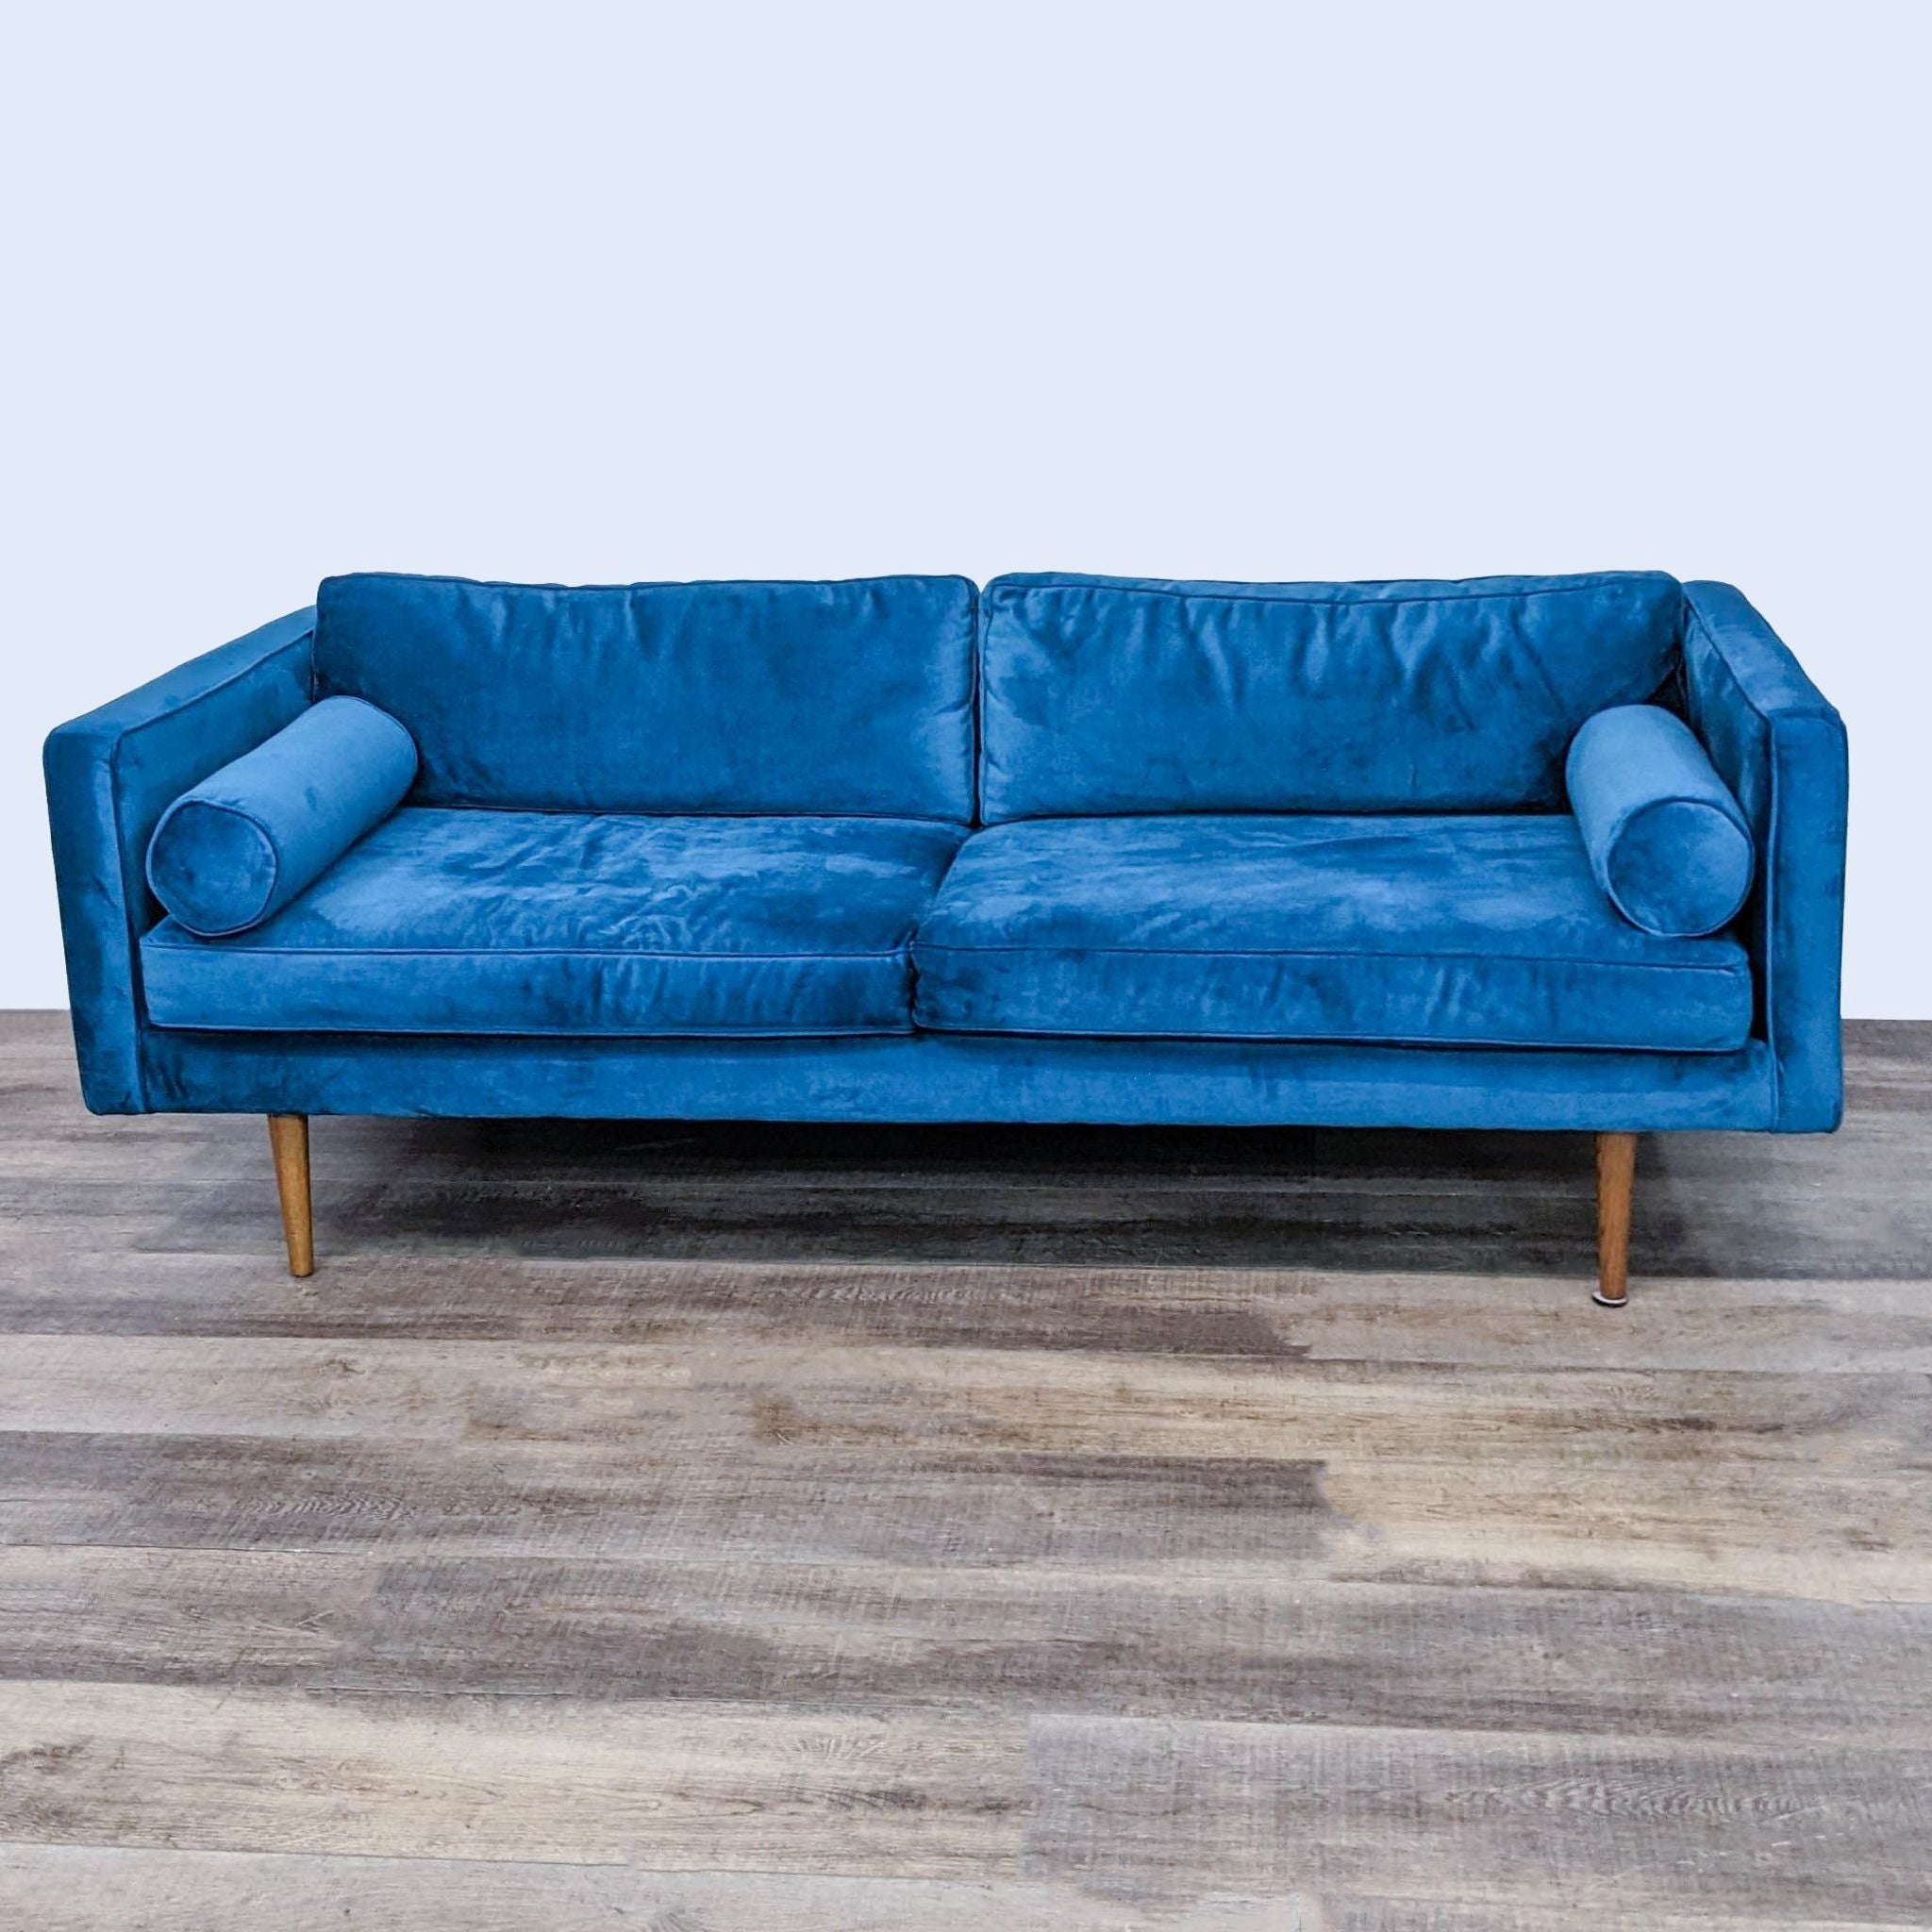 1. Blue velvet West Elm 3-seat sofa with tapered legs and two matching bolster pillows, set on a wooden floor.